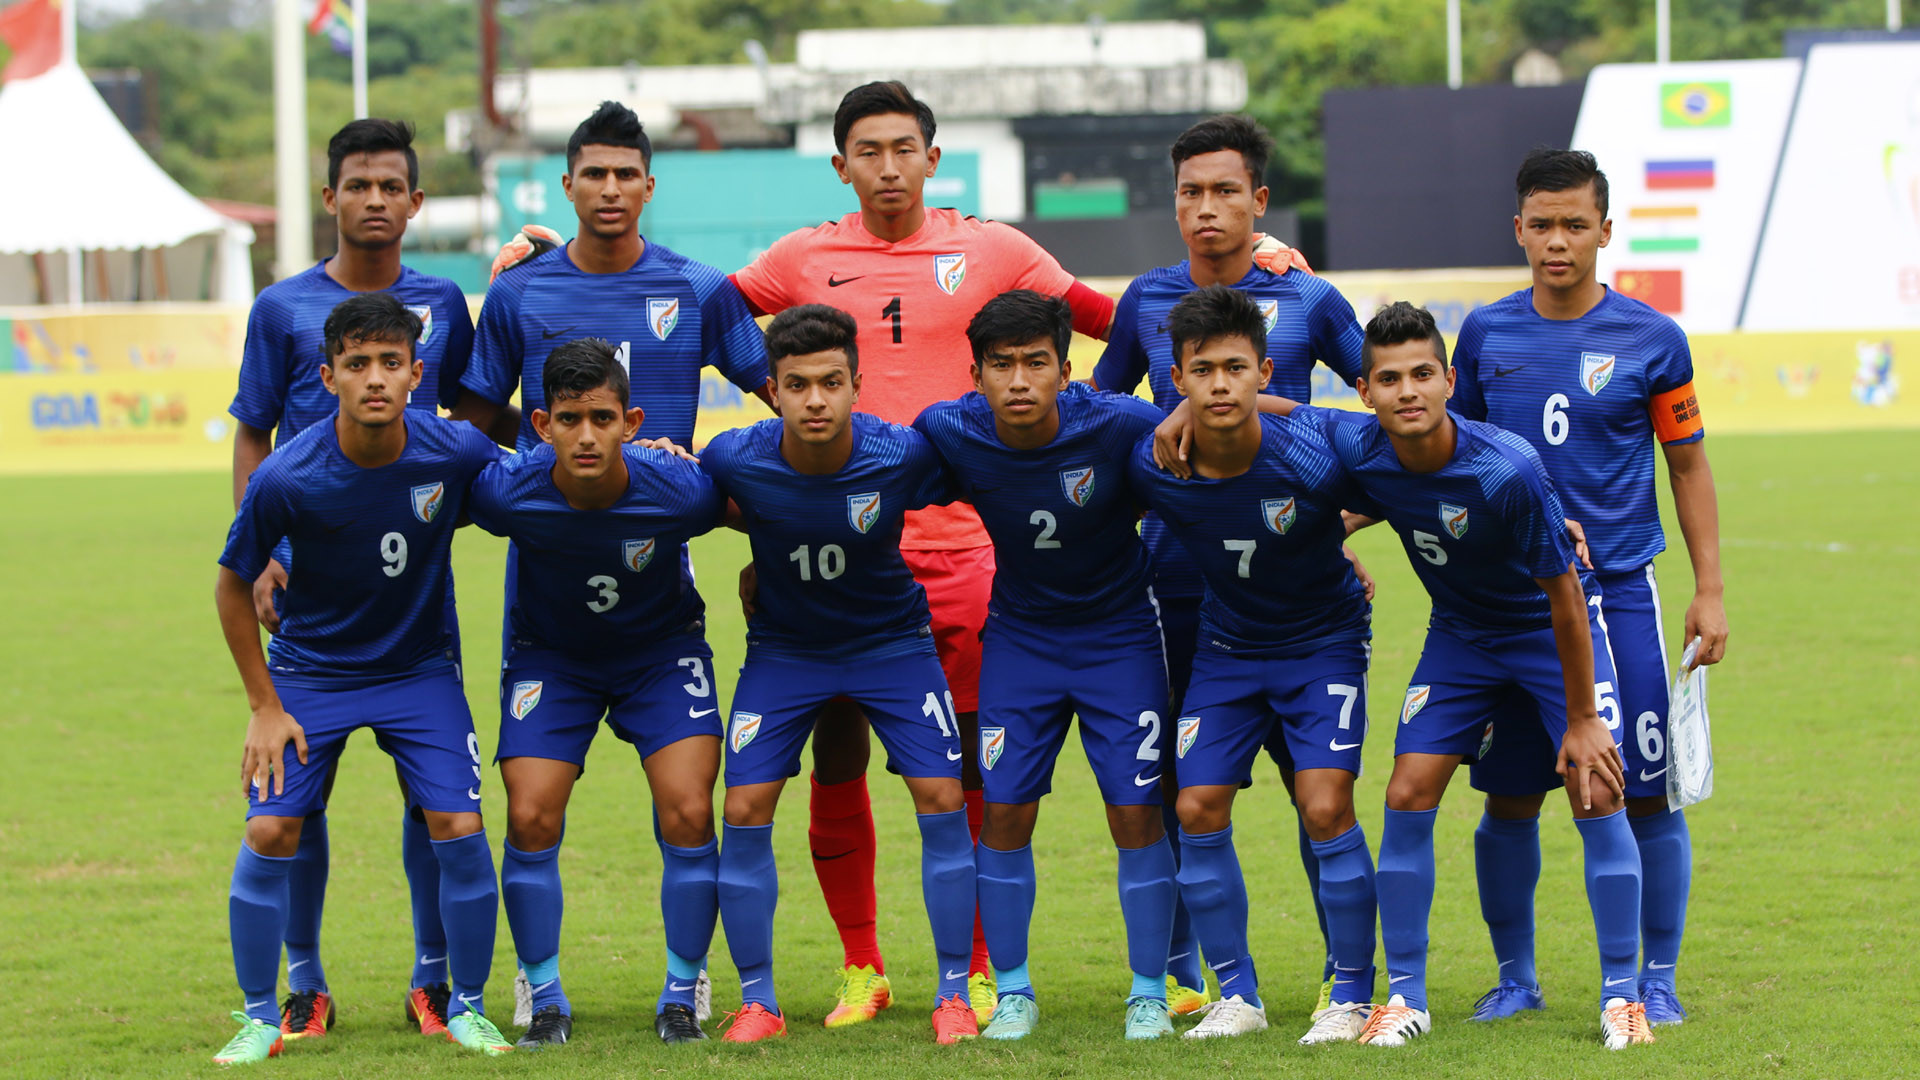 1920x1080 The under-16 Indian National Team that participated in the recent  tournament in Russia